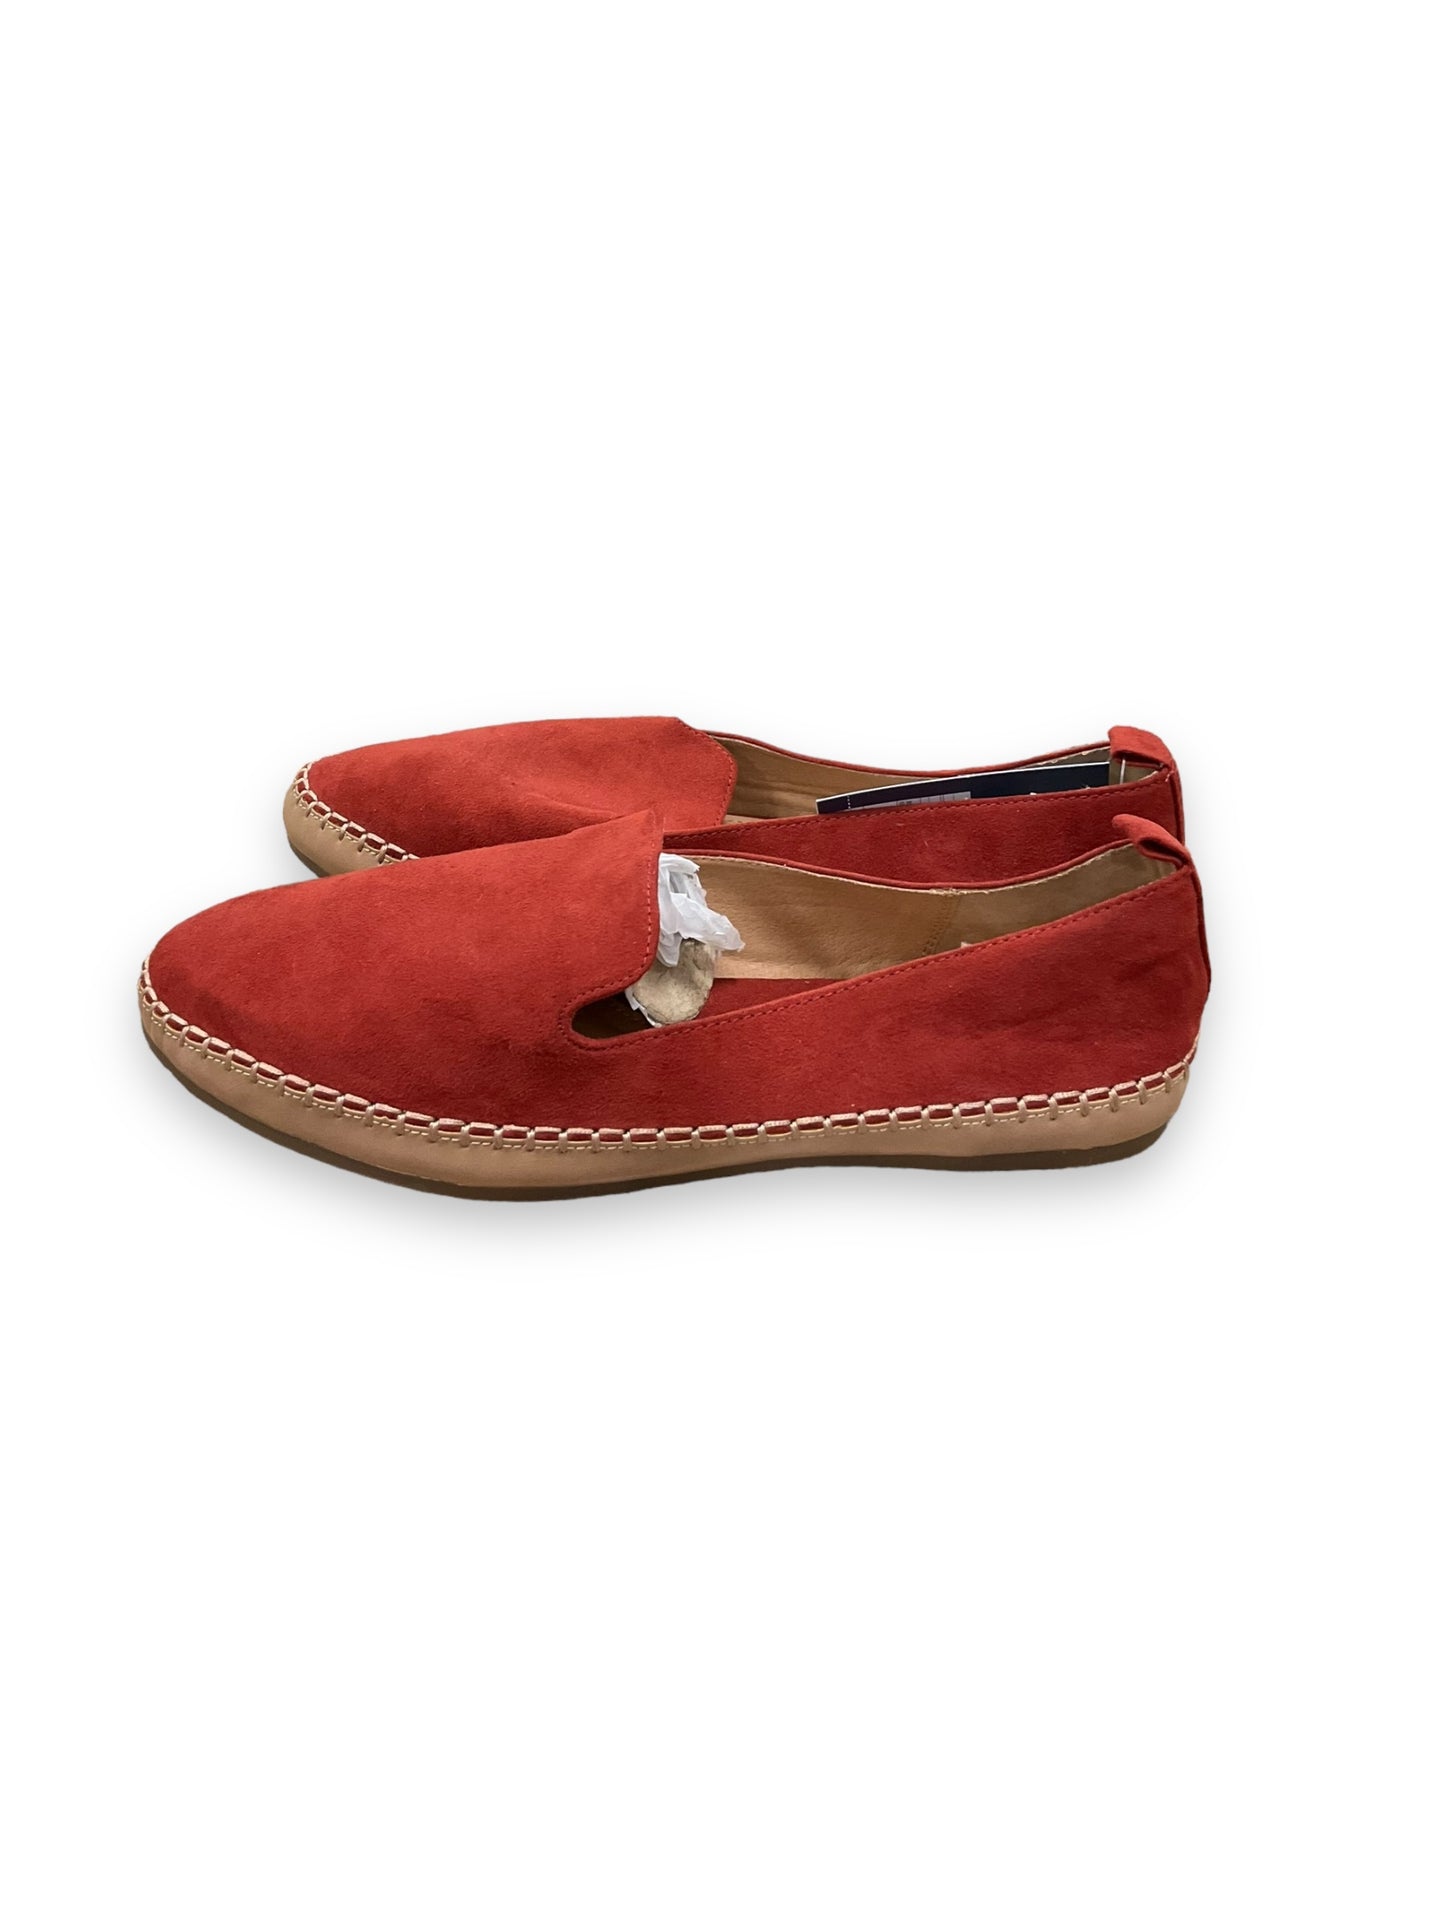 Shoes Flats By Universal Thread  Size: 10